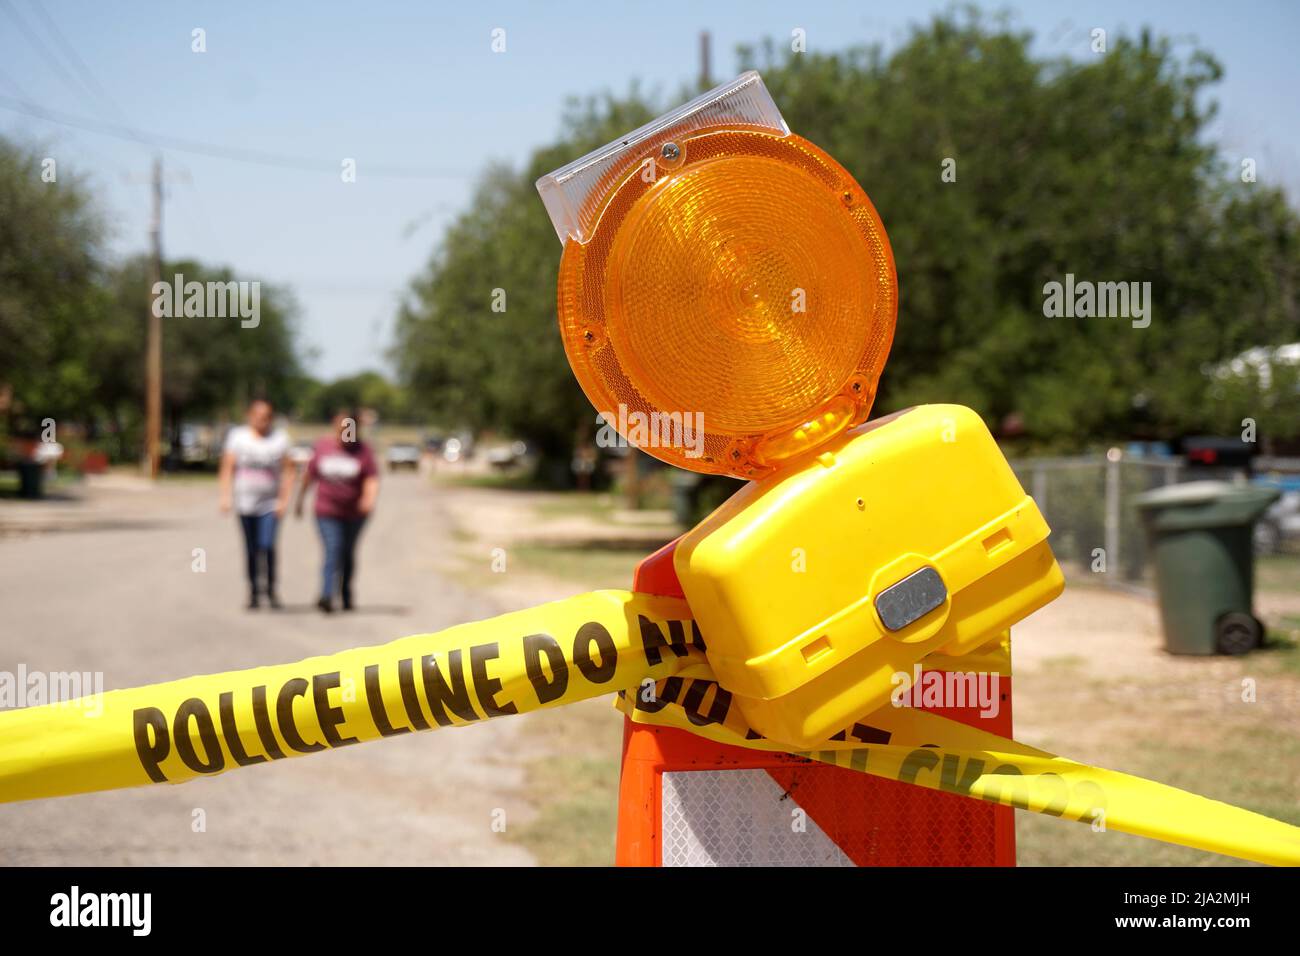 Uvalde. 26th May, 2022. Photo taken on May 26, 2022 shows roadblock near the school shooting site in Uvalde, Texas, the United States. At least 19 children and two adults were killed in a shooting at Robb Elementary School in the town of Uvalde, Texas, on Tuesday. Credit: Wu Xiaoling/Xinhua/Alamy Live News Stock Photo